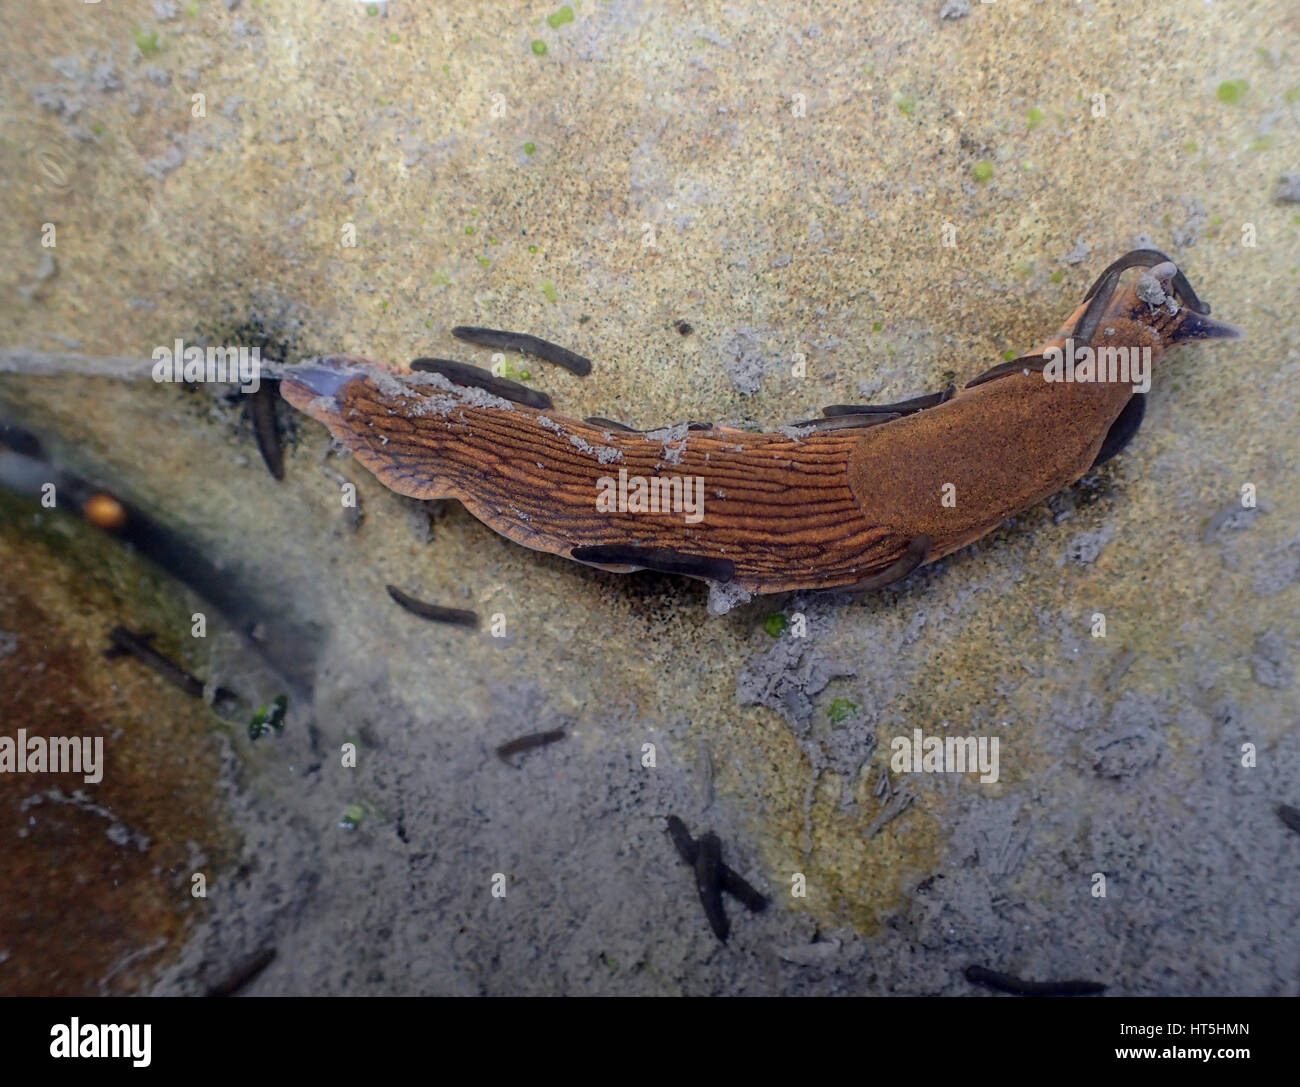 Spanish slug (Arion vulgaris) underwater and surrounded by flatworms (Polycelis nigra or Polycelis tenuis) on a sandstone rock in a garden pond Stock Photo